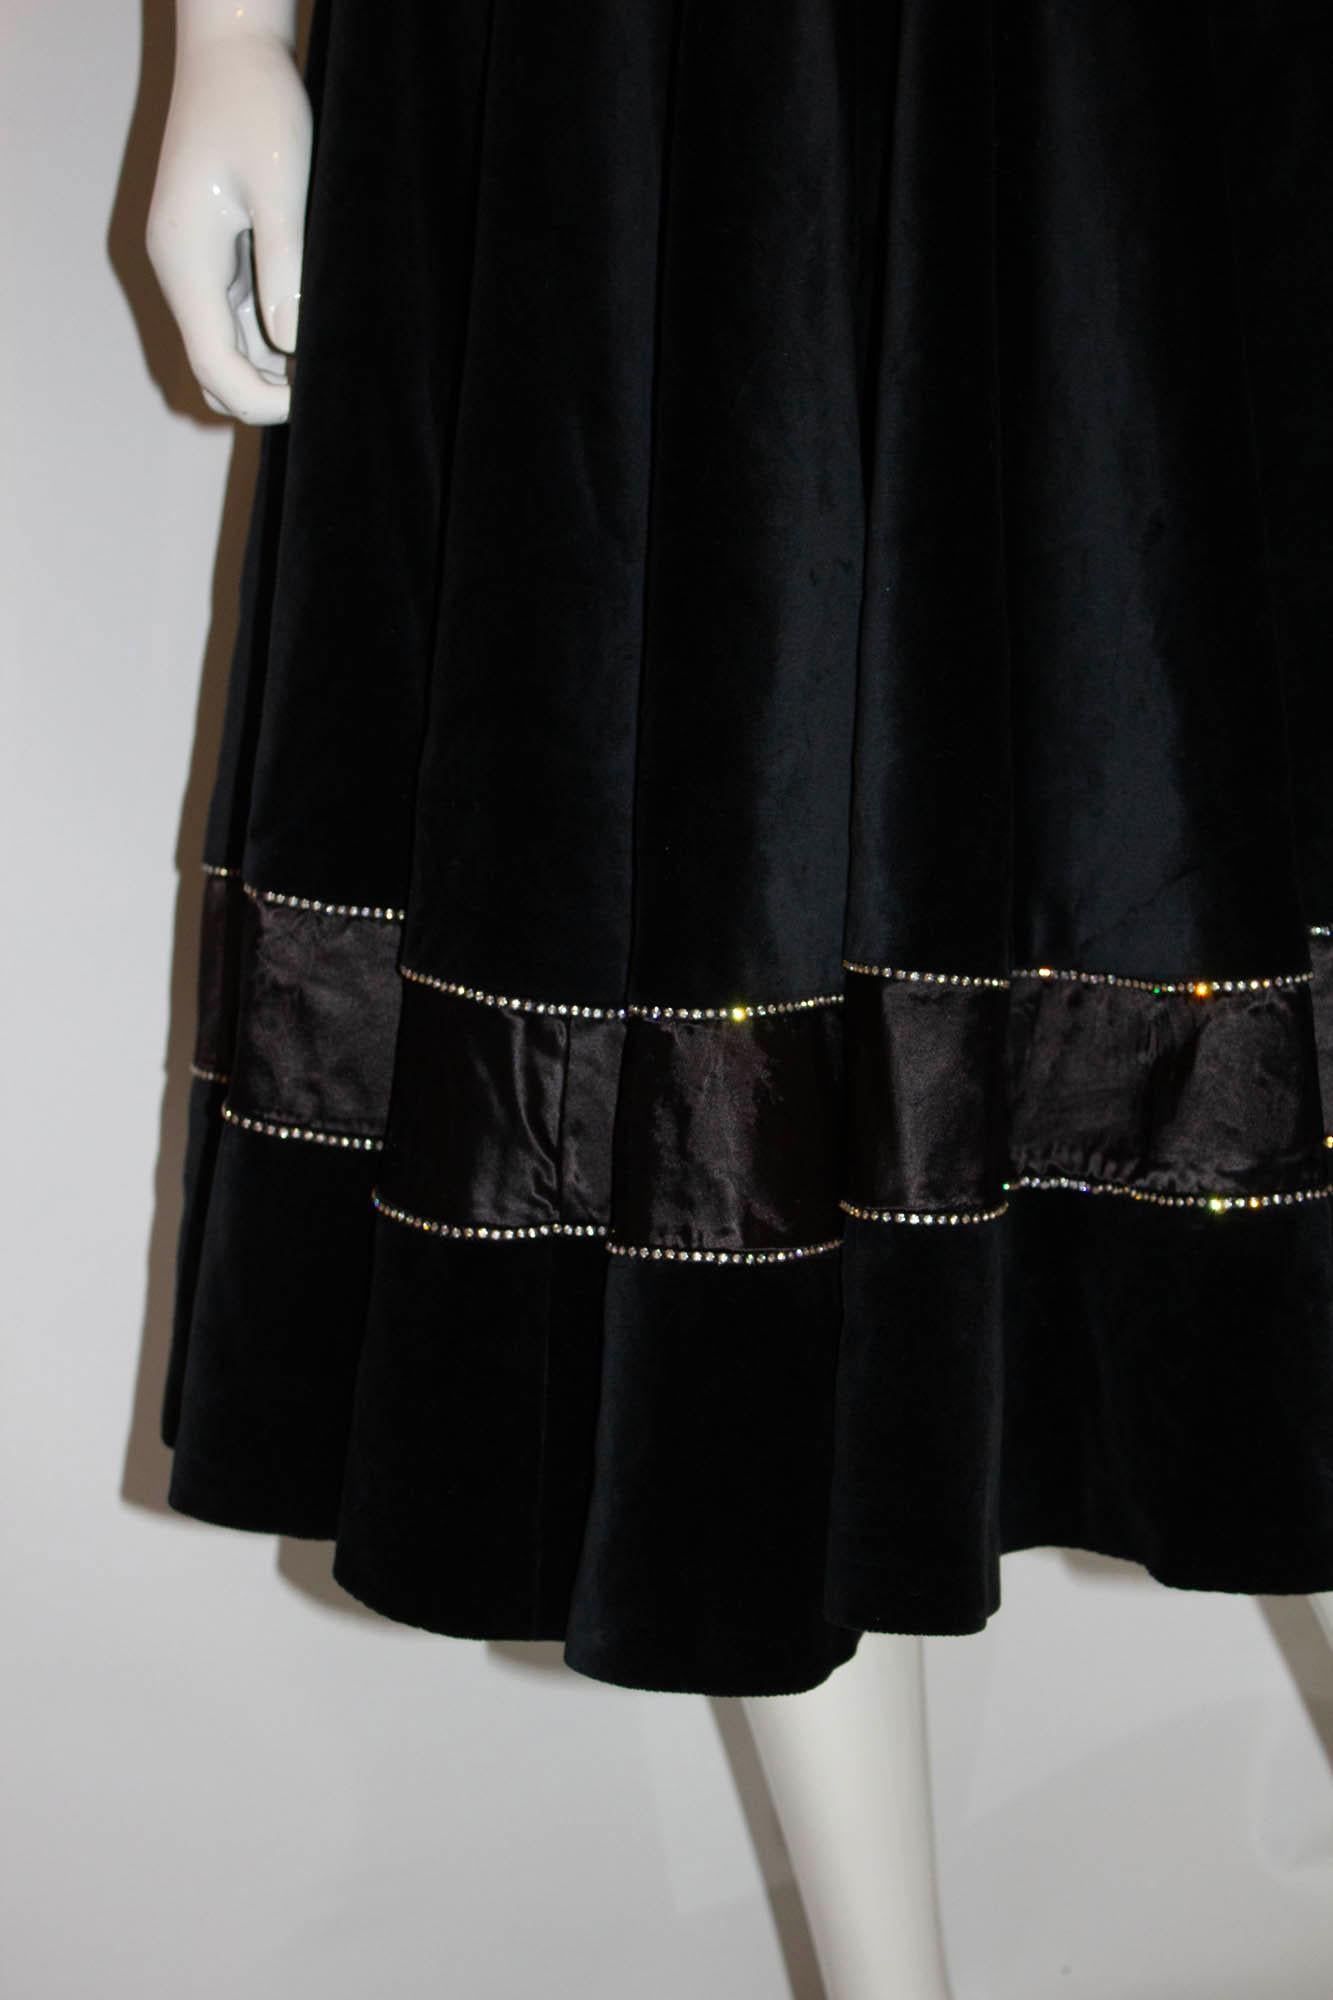 A wonderful skirt by Malcolm Hall, designer to the stars. The full skirt is in black velvet with diamante and satin detail near the hem. It is fully lined. Labelled size 12, waist 26'', length 30''